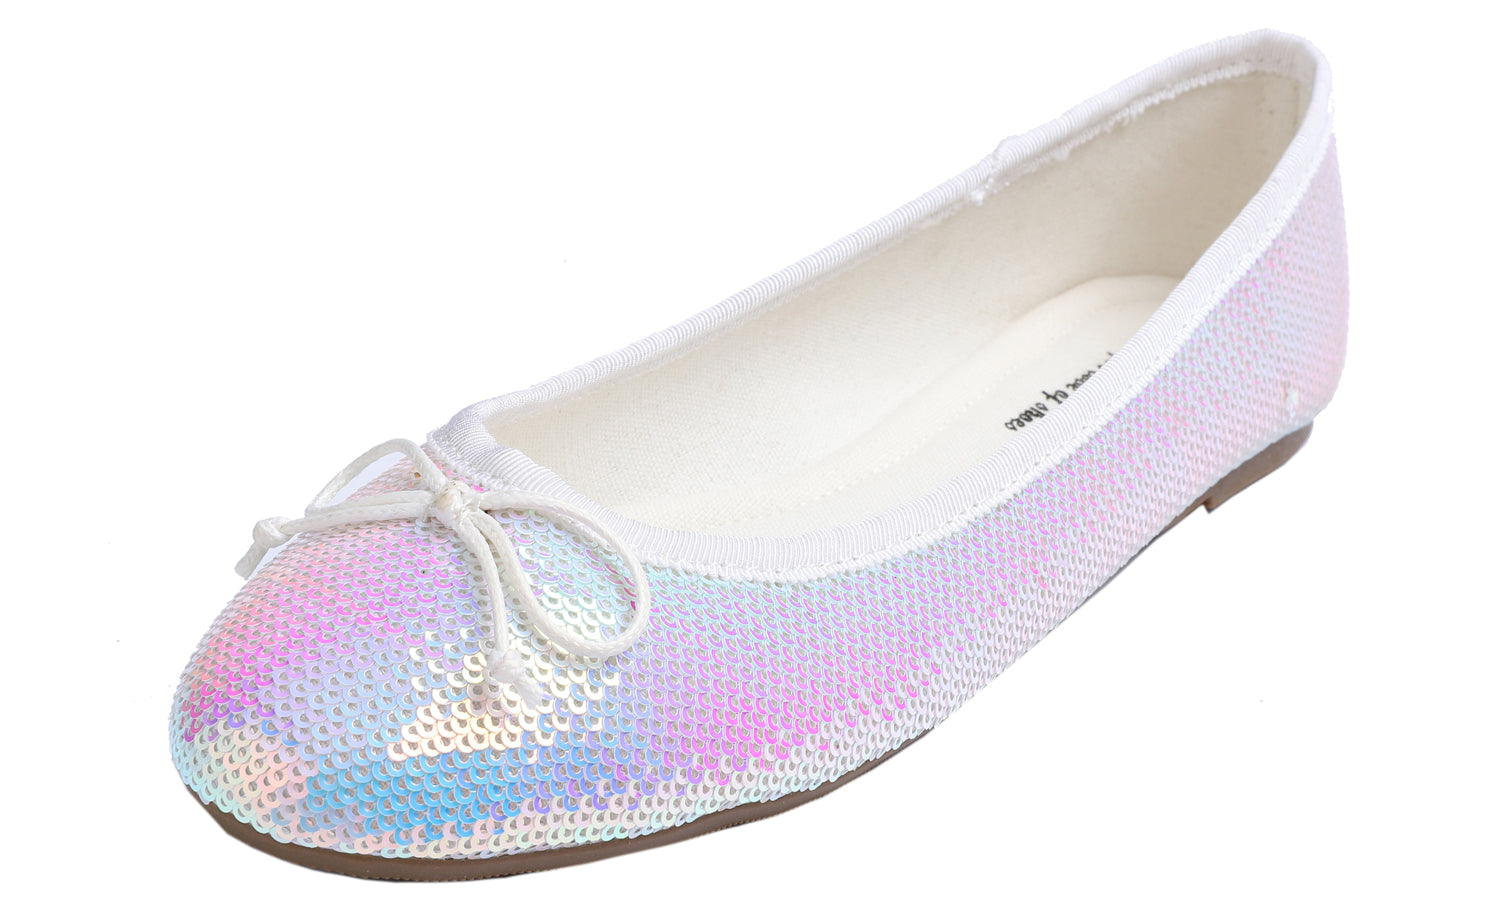 Feversole Women's Sparkle Memory Foam Cushioned Colorful Shiny Ballet Flats AB White Sequin